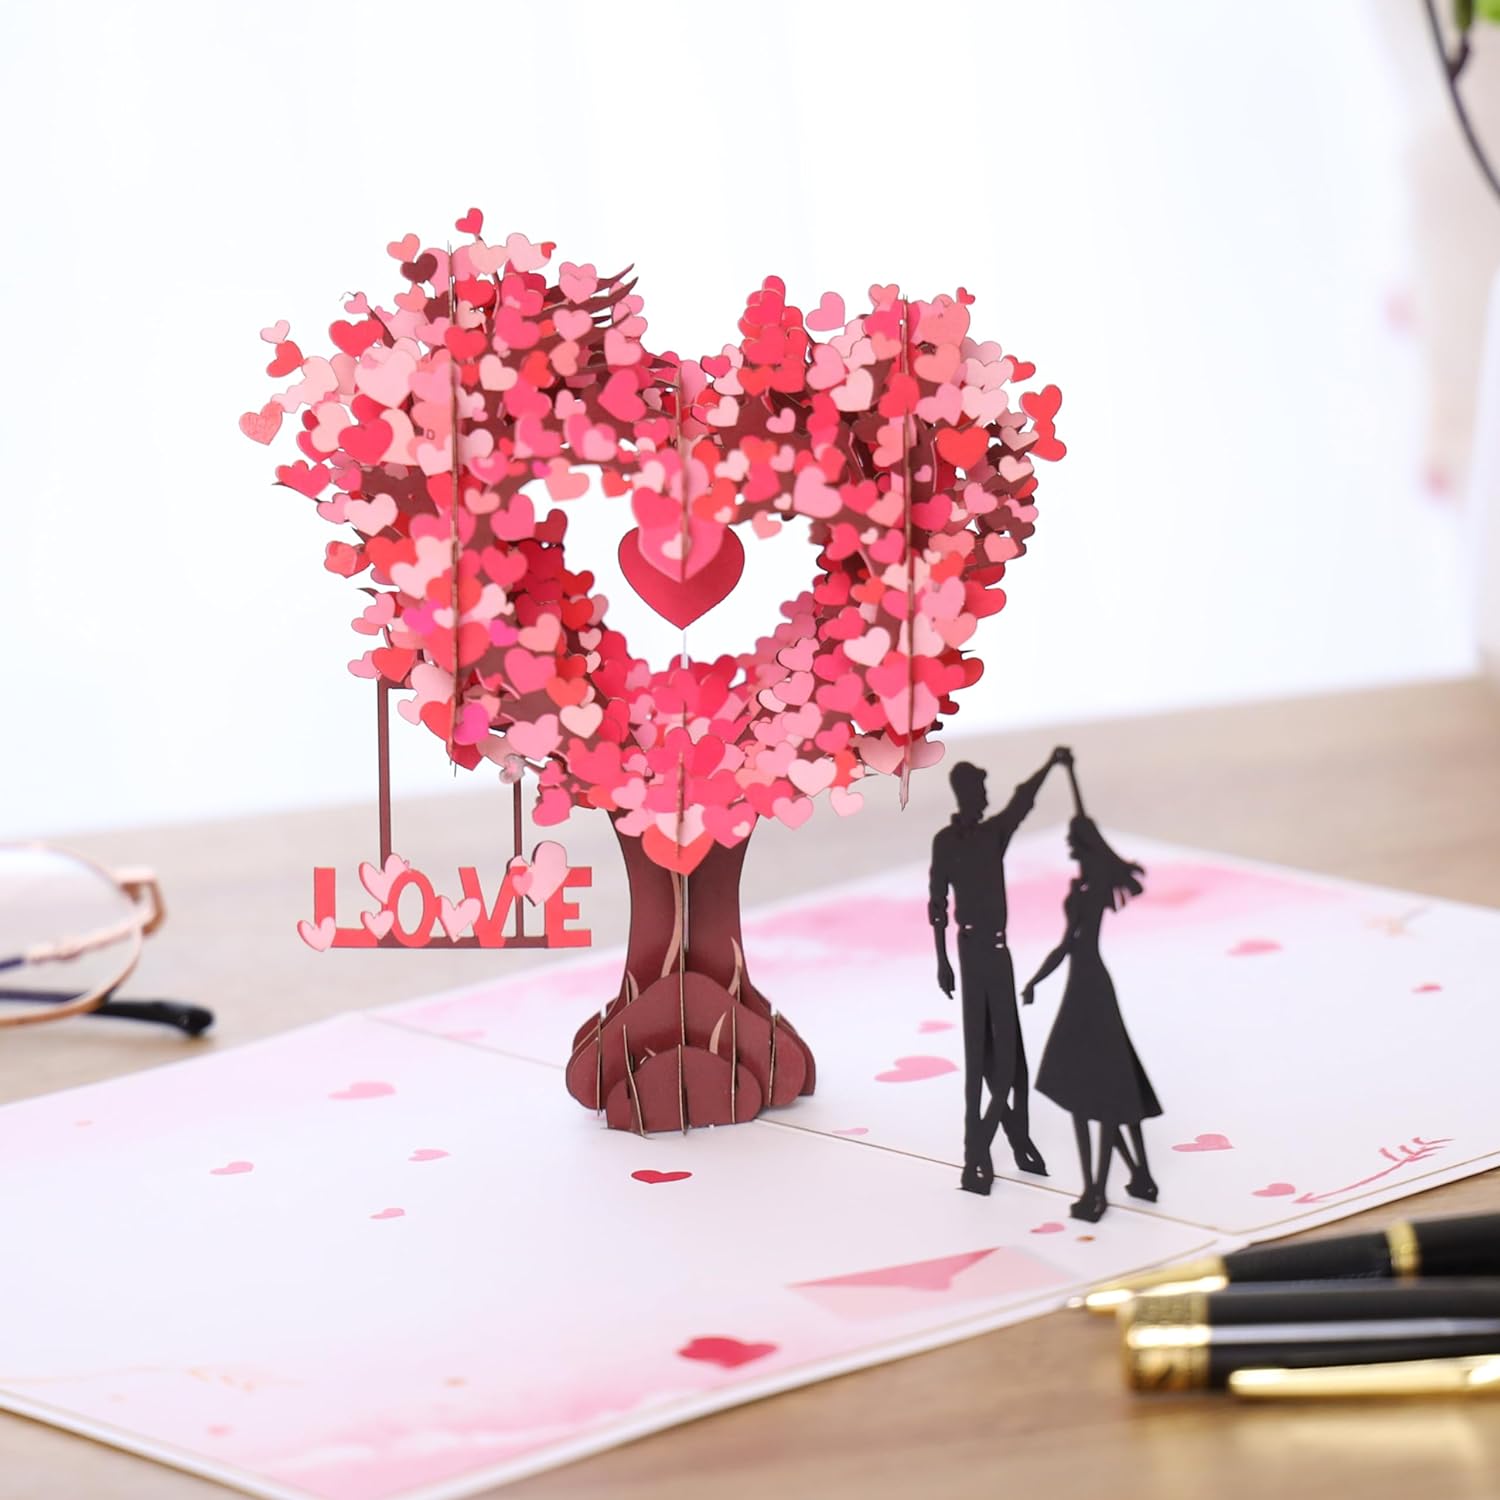 Love tree Valentine's Day pop-up cards - Romantic love greeting card